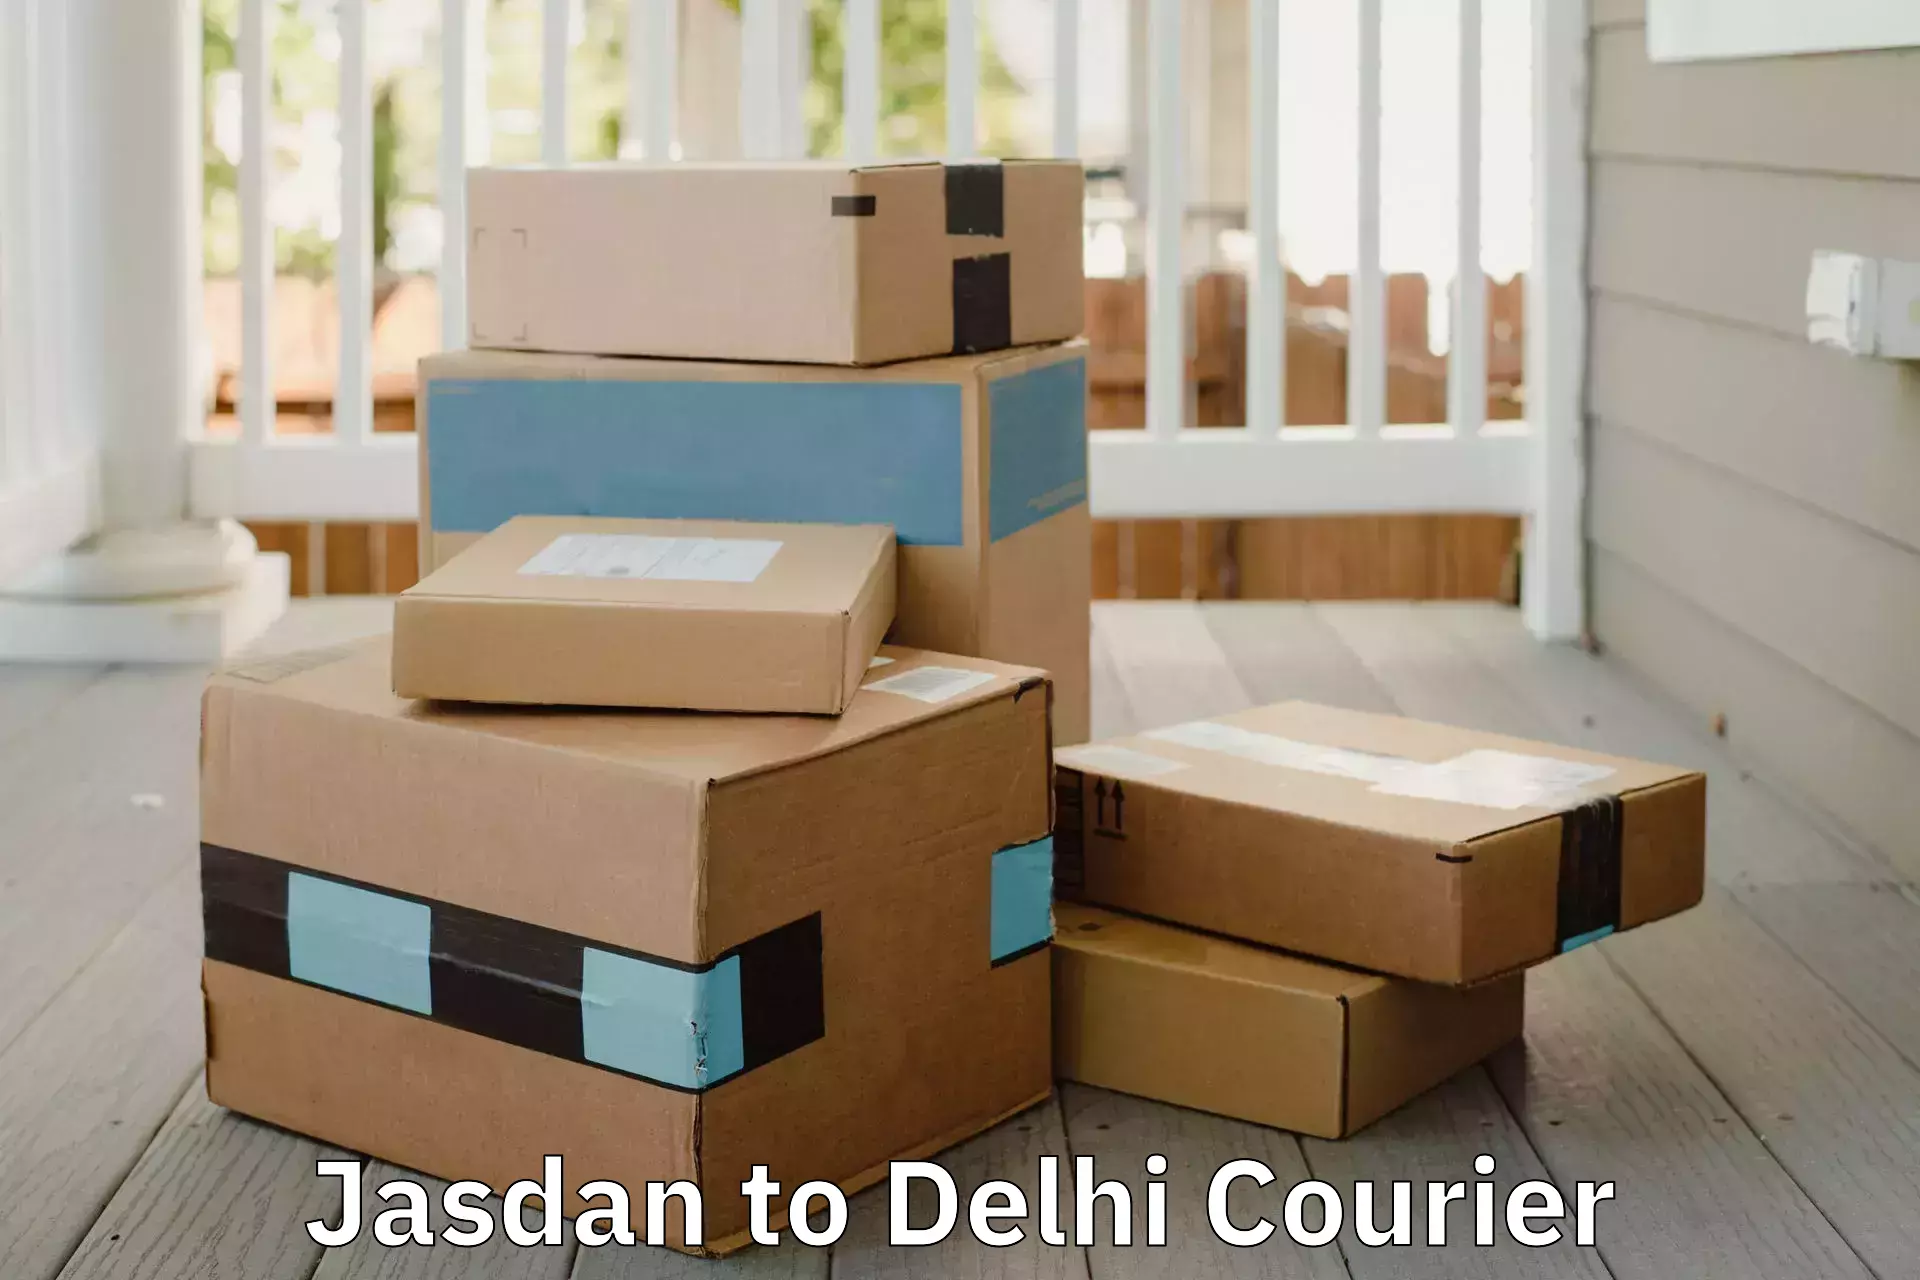 Full-service household moving Jasdan to NCR